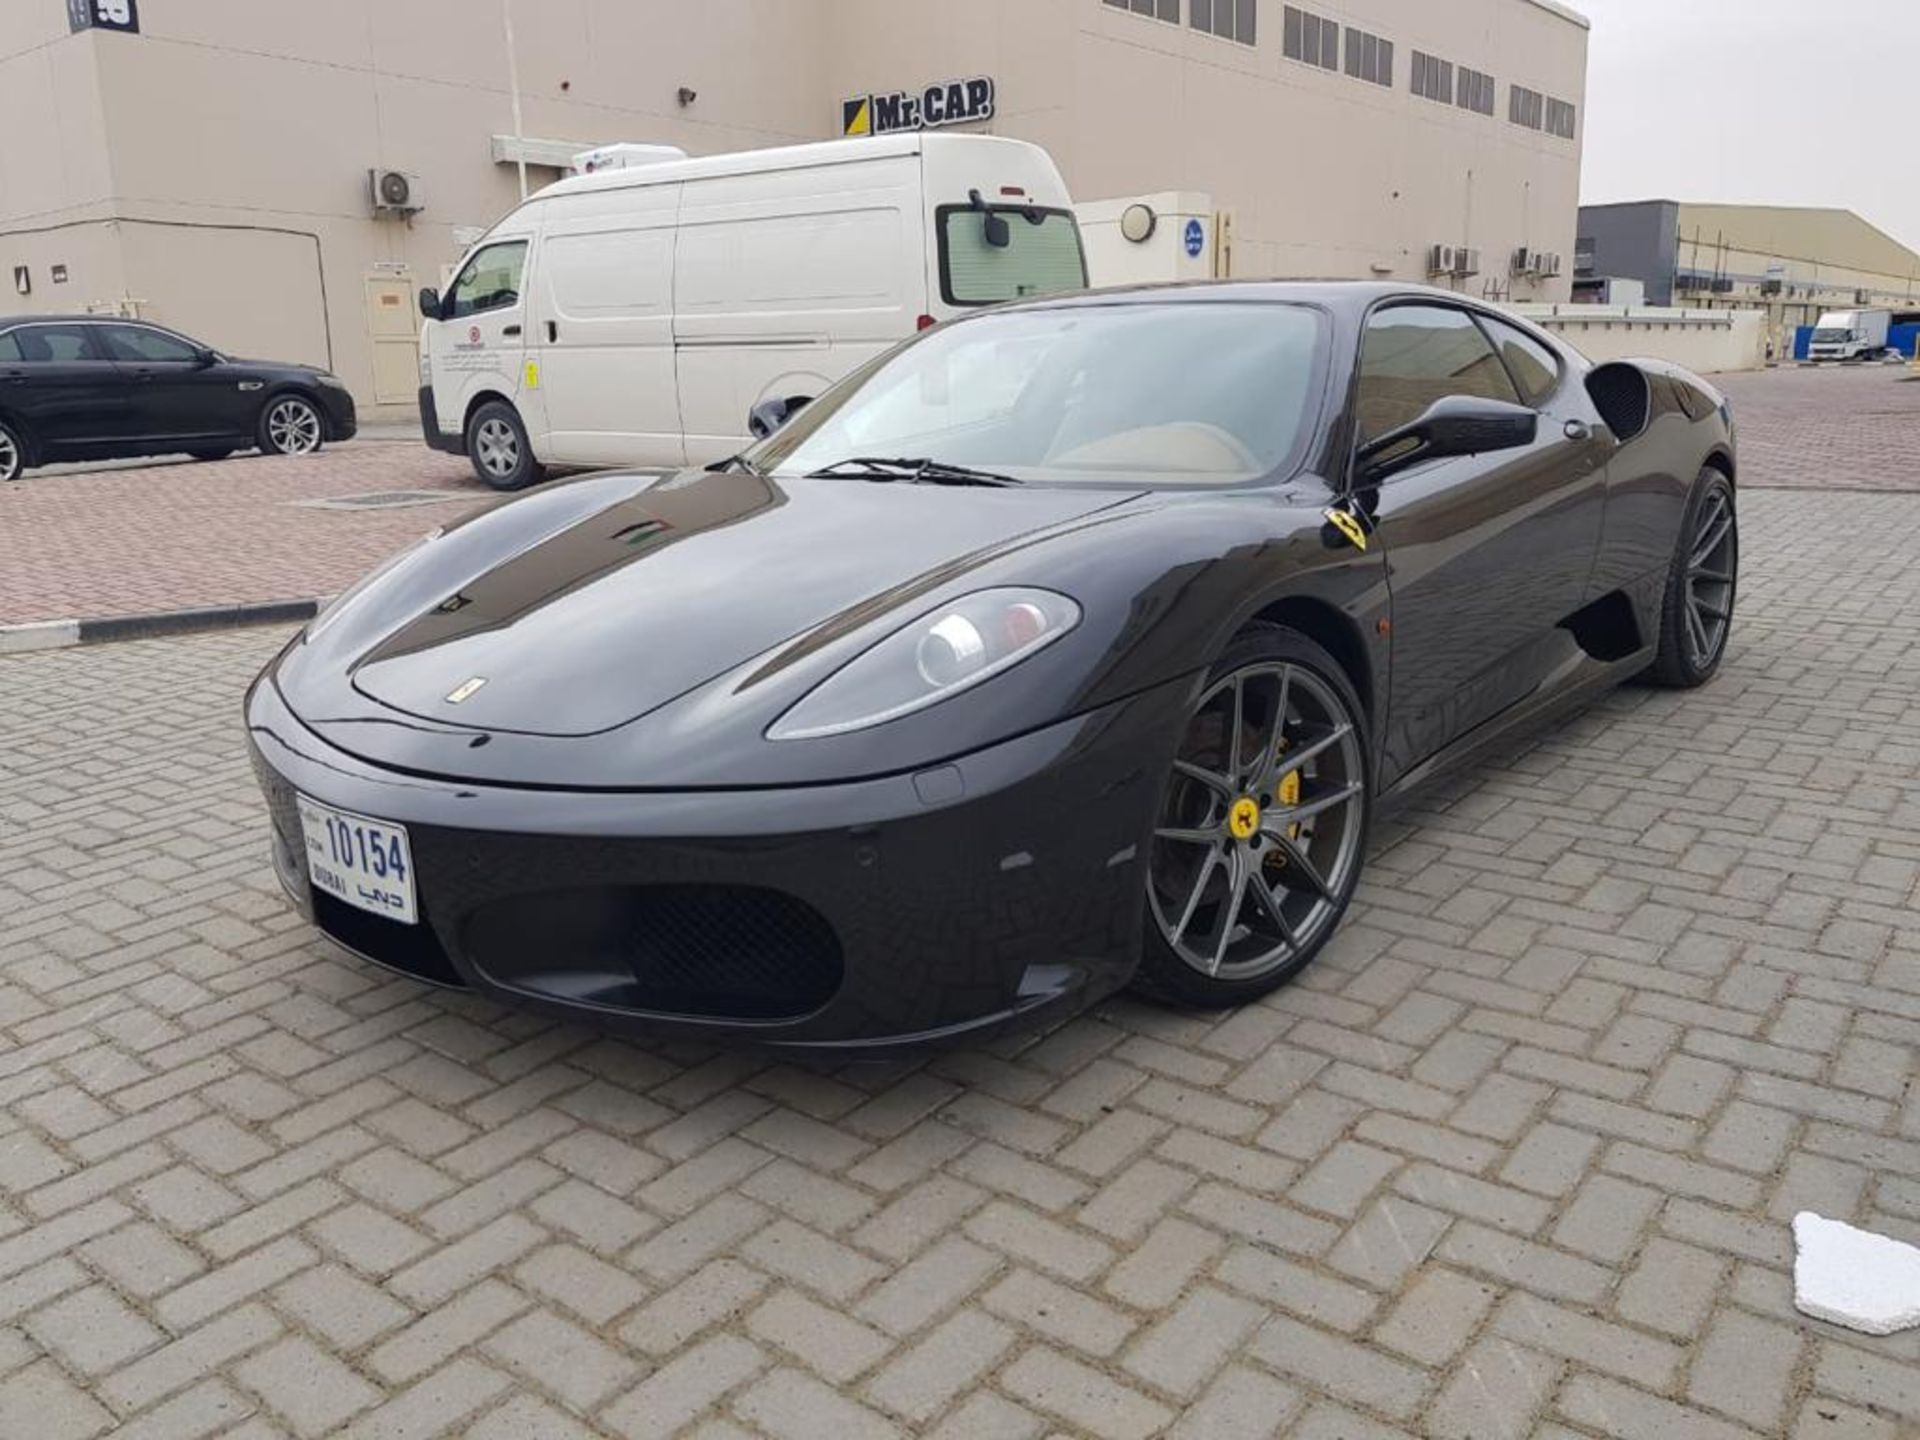 2007 FERRARI F430 BLACK 2 DOOR COUPE 4.3L AUTOMATIC LHD, PERFECT CONDITION INSIDE AND OUT - Image 4 of 13